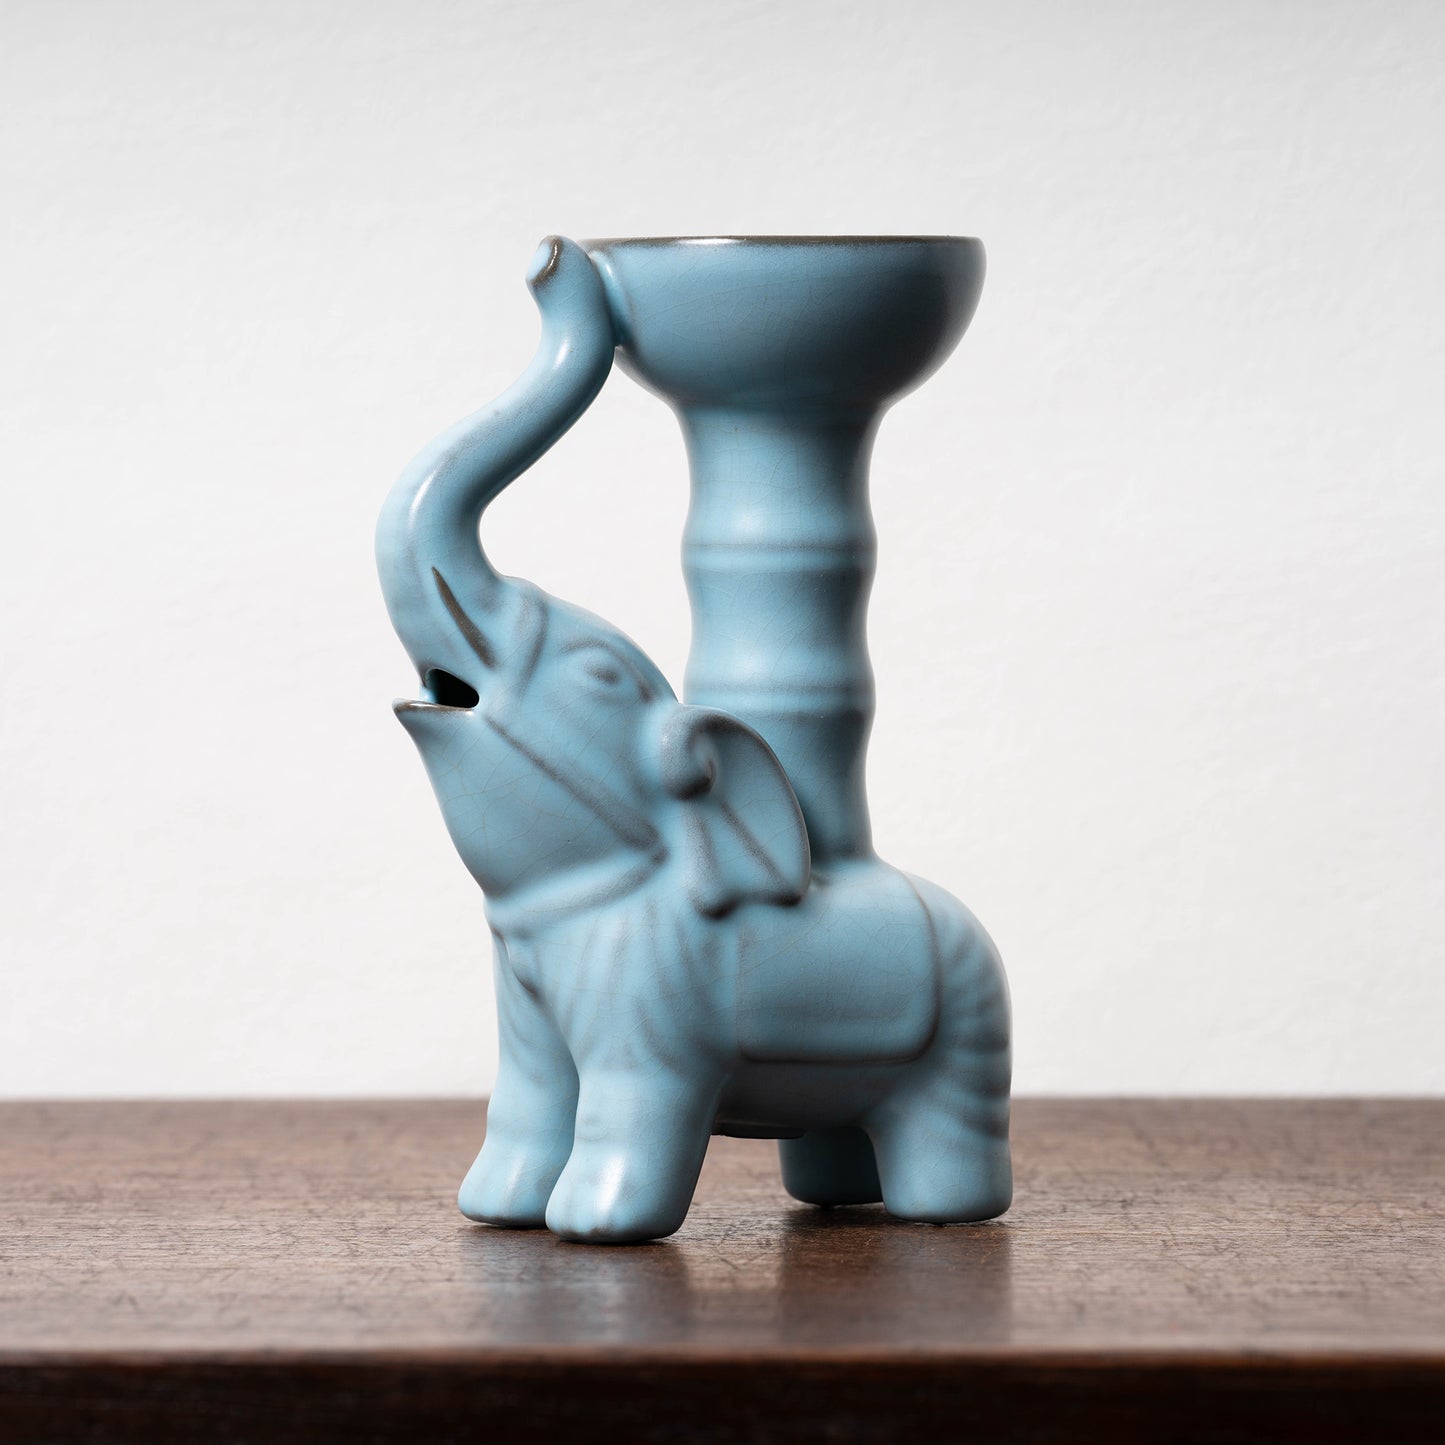 Qing Dynasty Ru-ware-like Celadon Incense Stand with Elephant Shaped